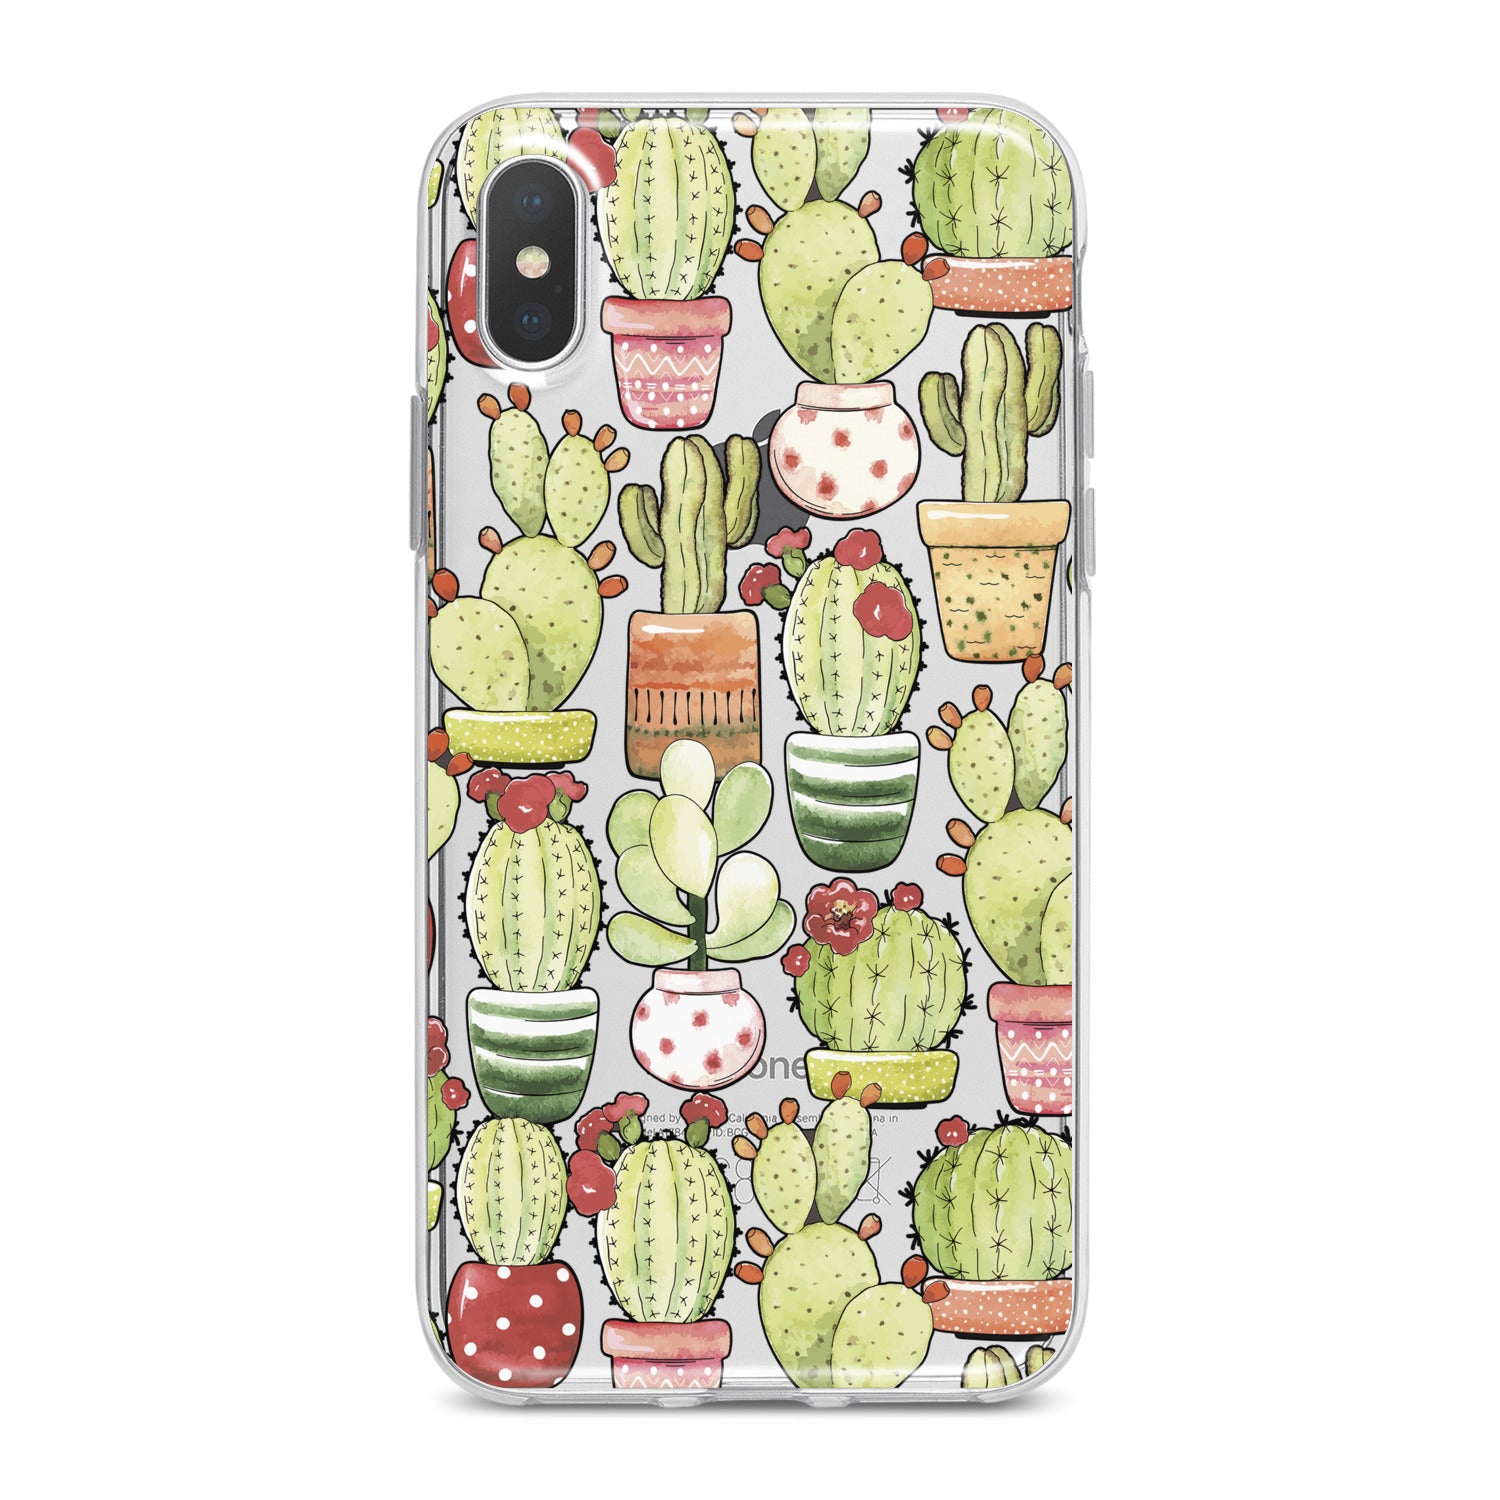 Lex Altern Funny Cactus Theme Phone Case for your iPhone & Android phone.